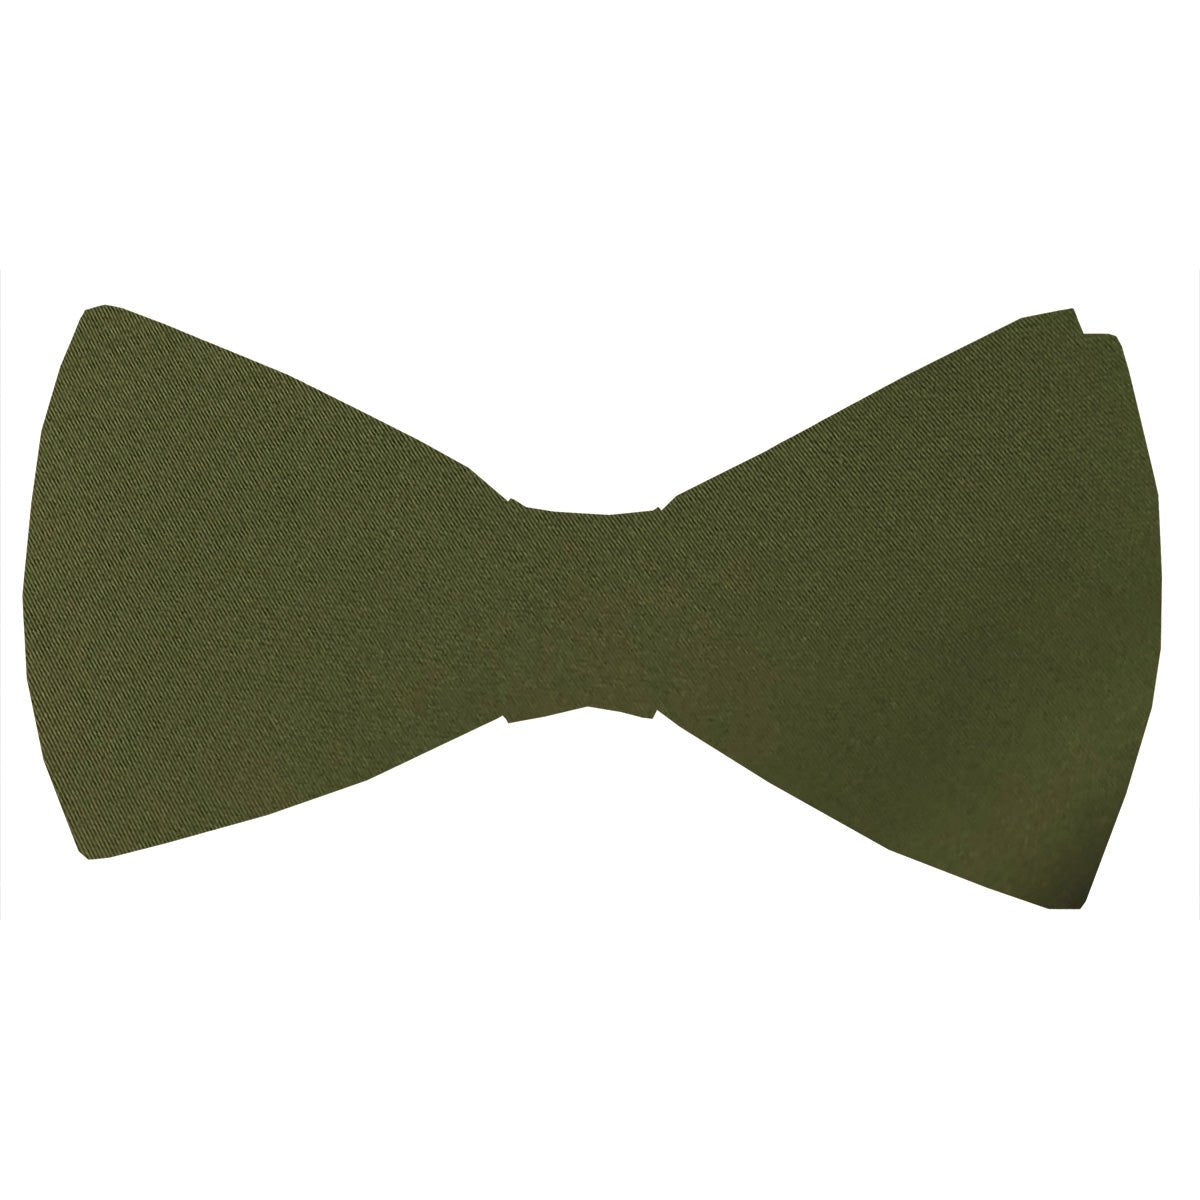 Ivy Bow Ties - Wedding Bow Tie - Pre-Tied - Swagger & Swoon